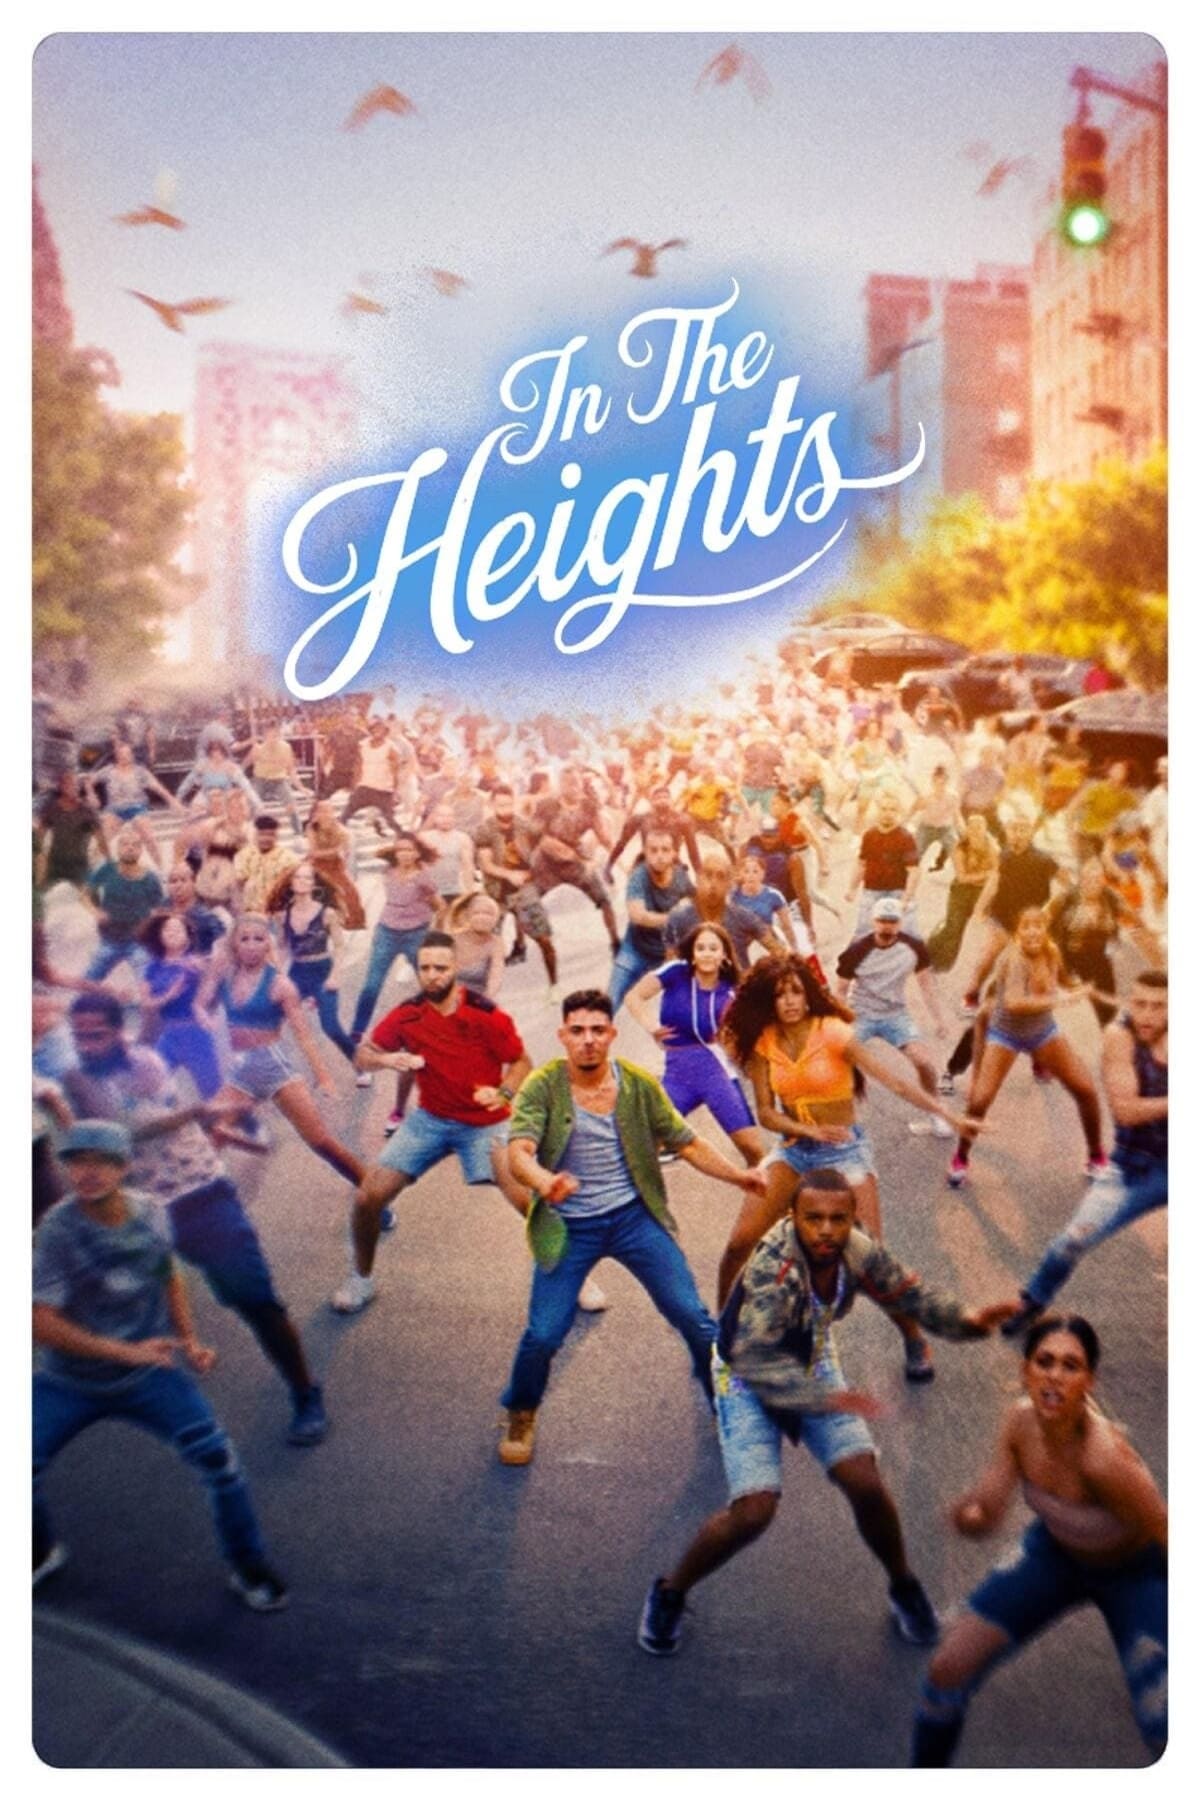 aerial view of people dancing with In the heights written in blue script text at the top